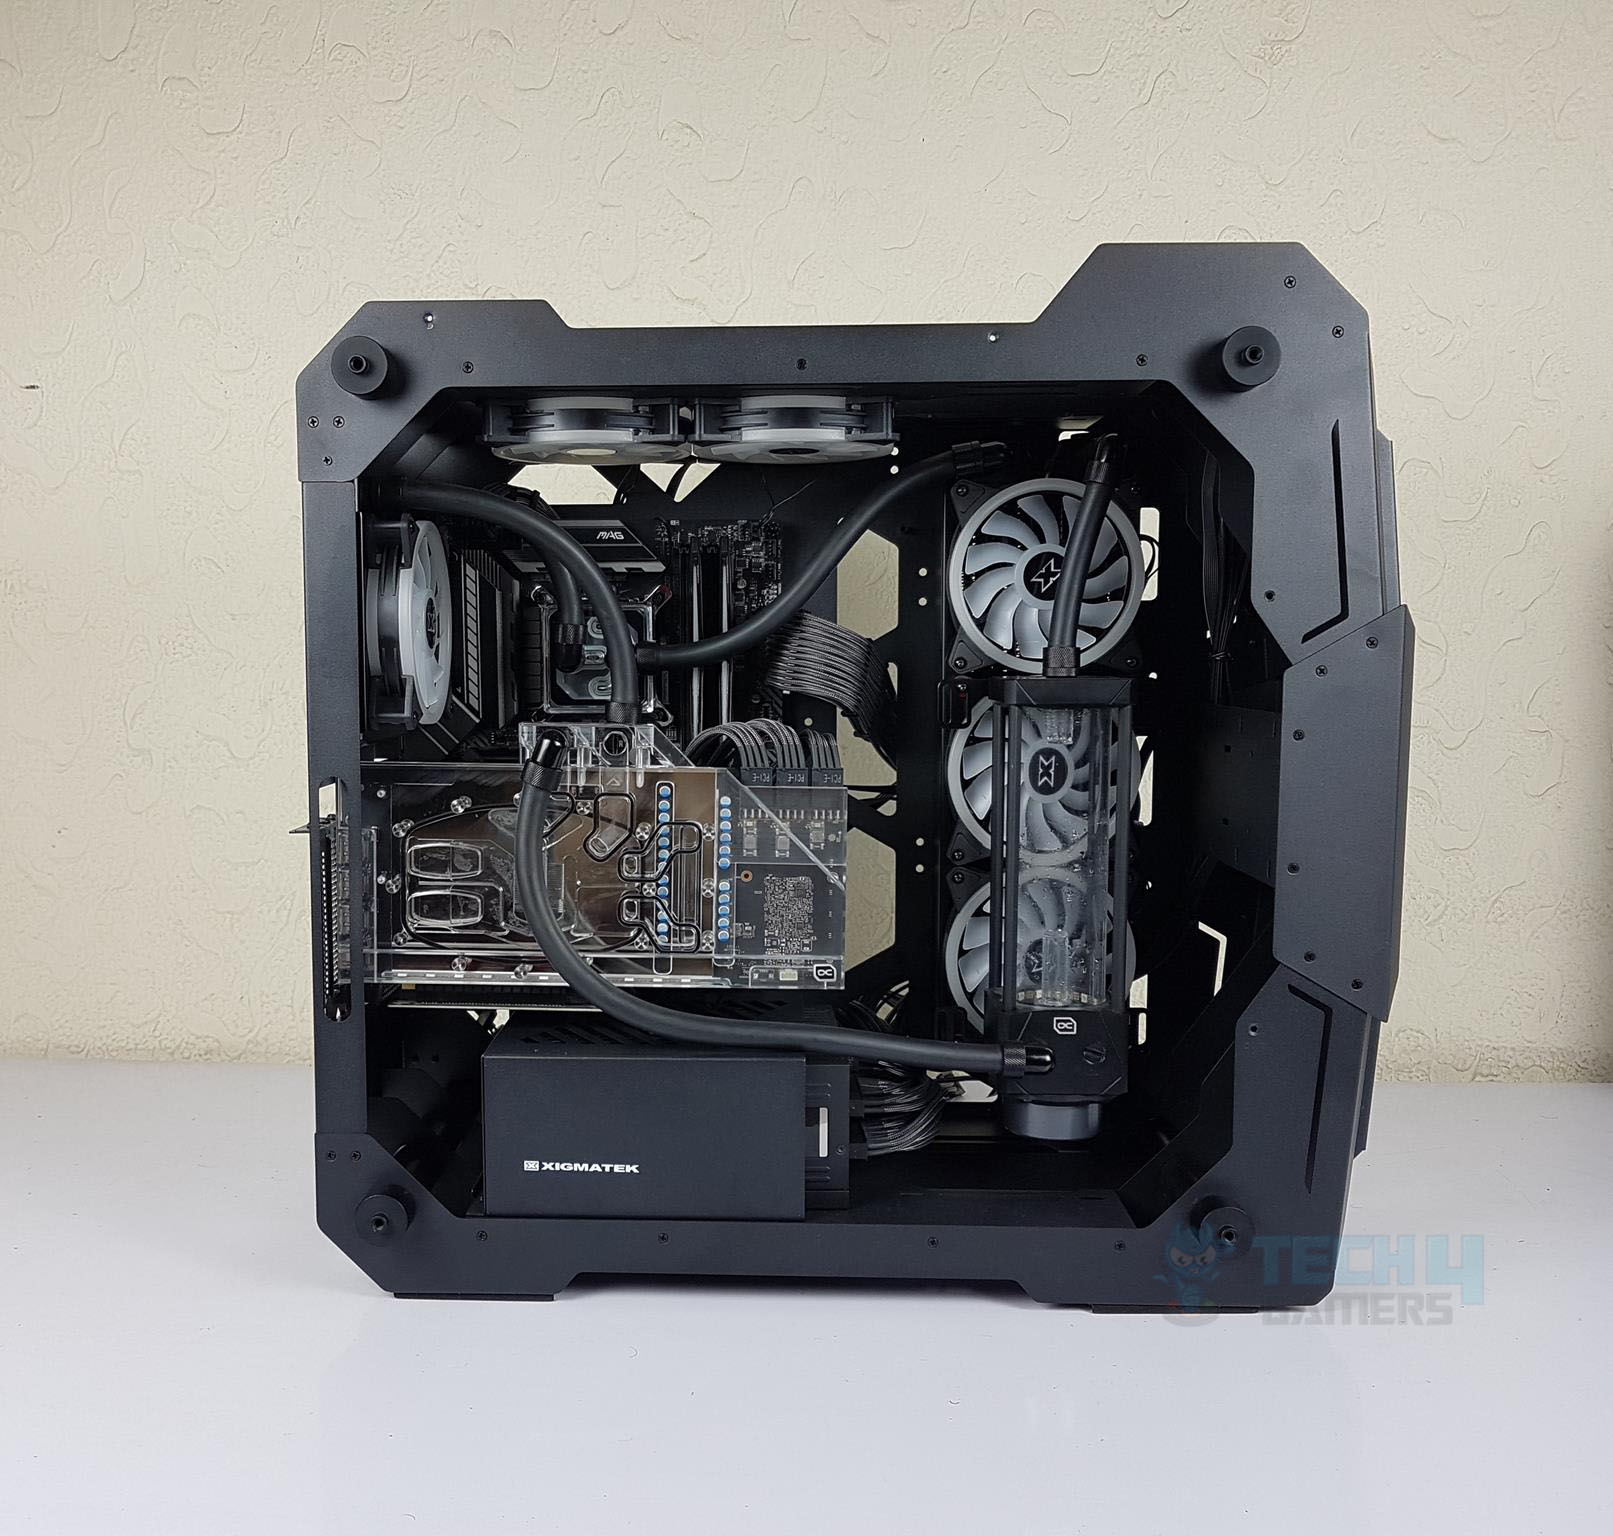 PC Case with decent airflow and fans